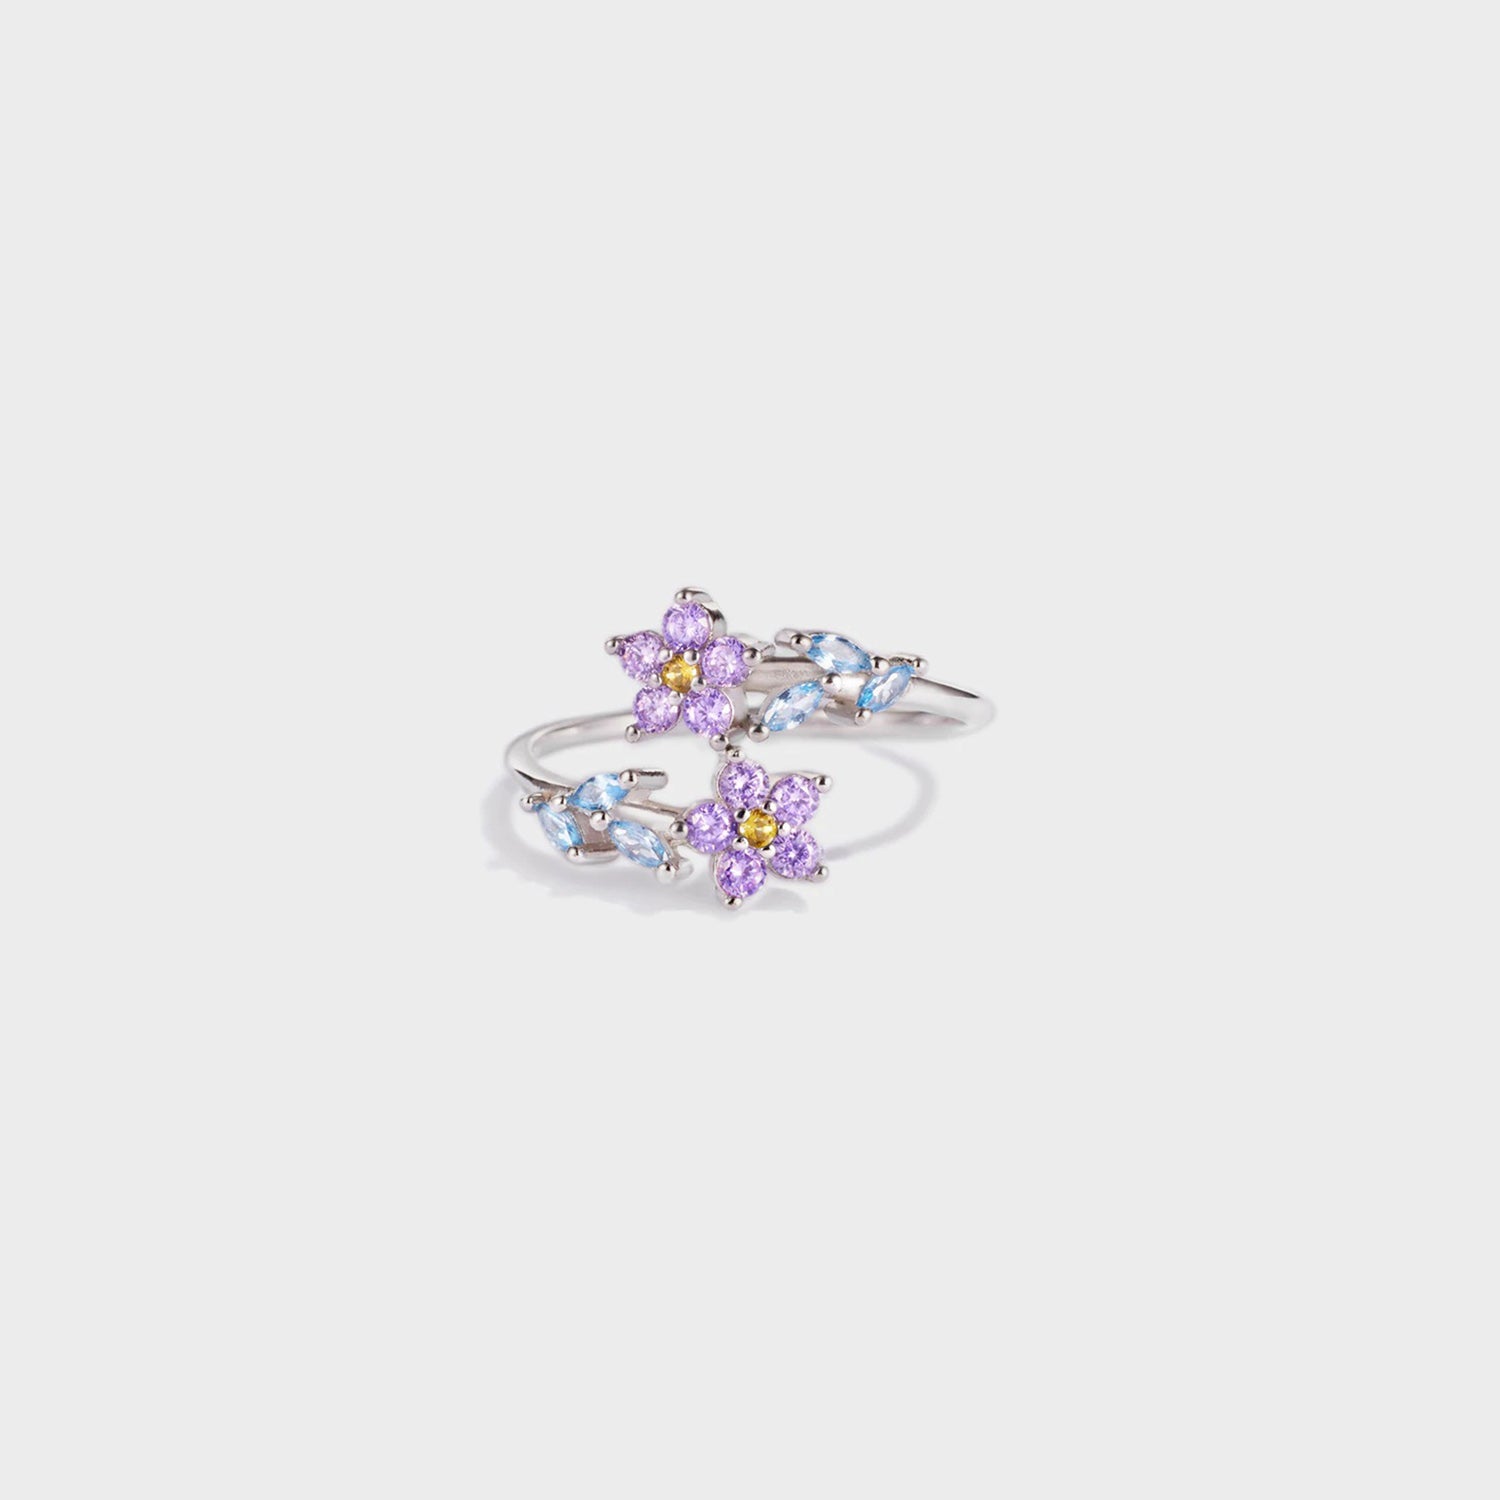 Flower Shape Inlaid Zircon 925 Sterling Silver Ring - Tophatter Shopping Deals - Electronics, Jewelry, Beauty, Health, Gadgets, Fashion